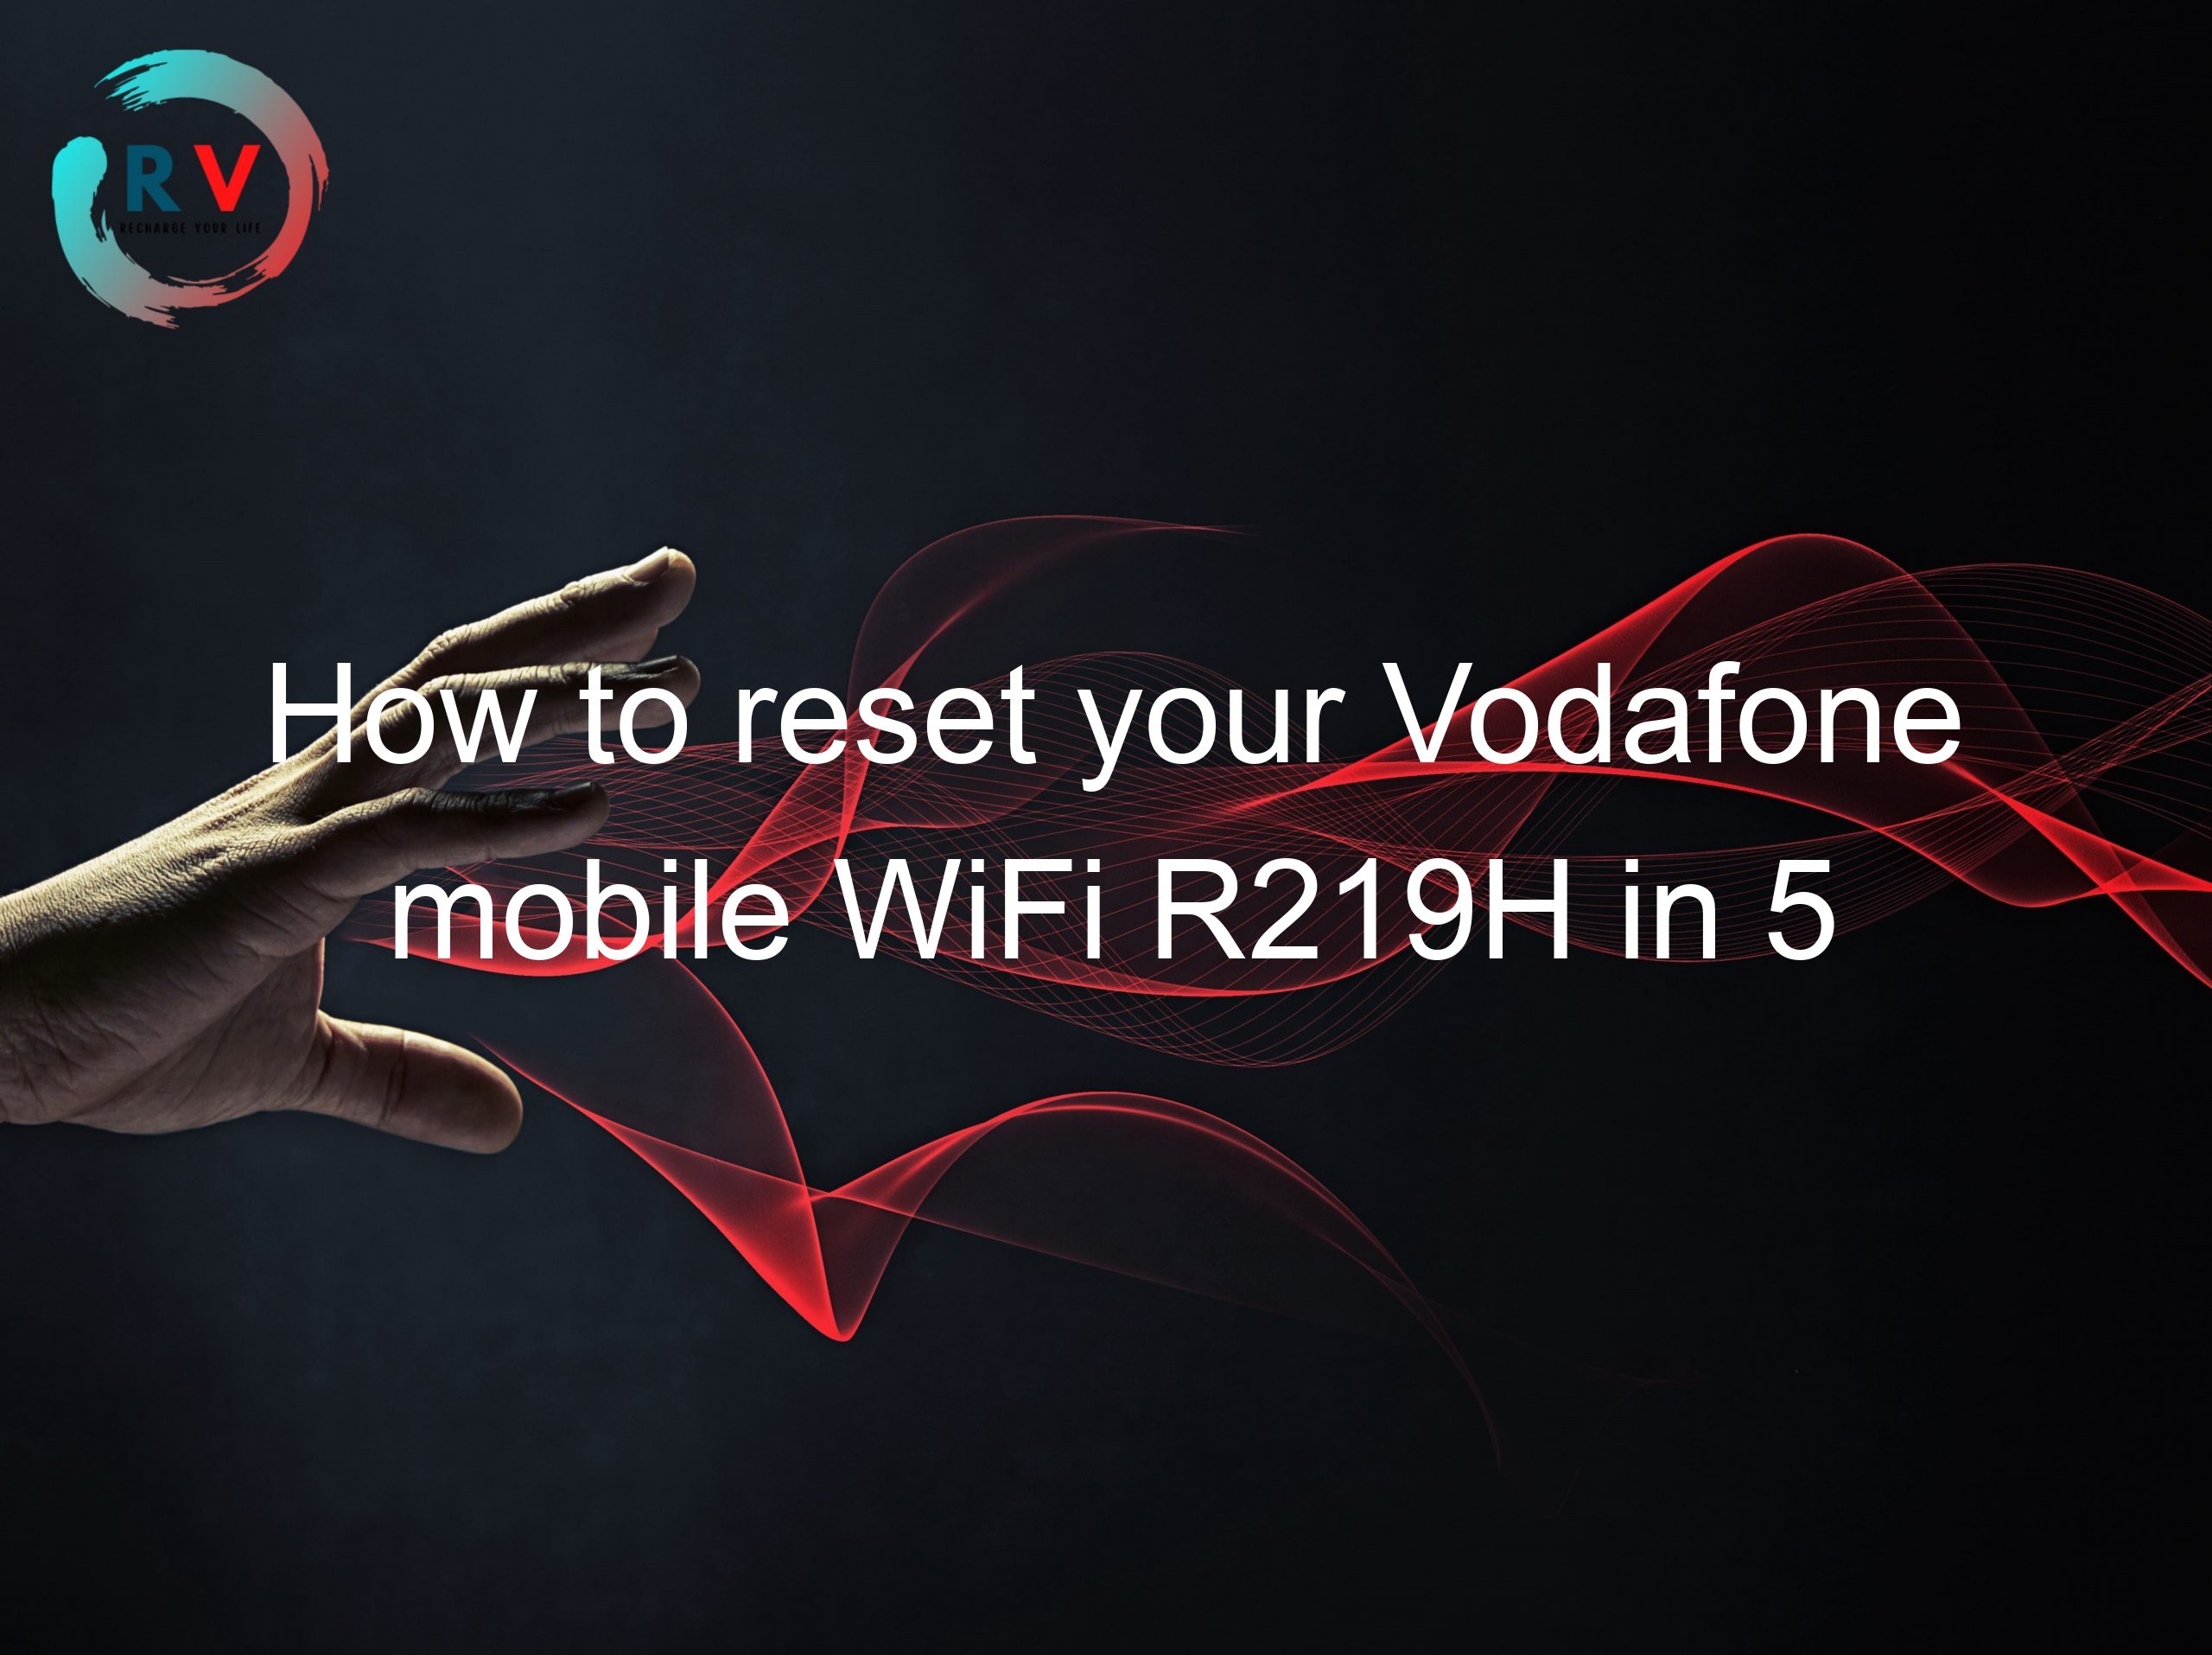 How to reset your Vodafone mobile WiFi R219H in 5 easy steps